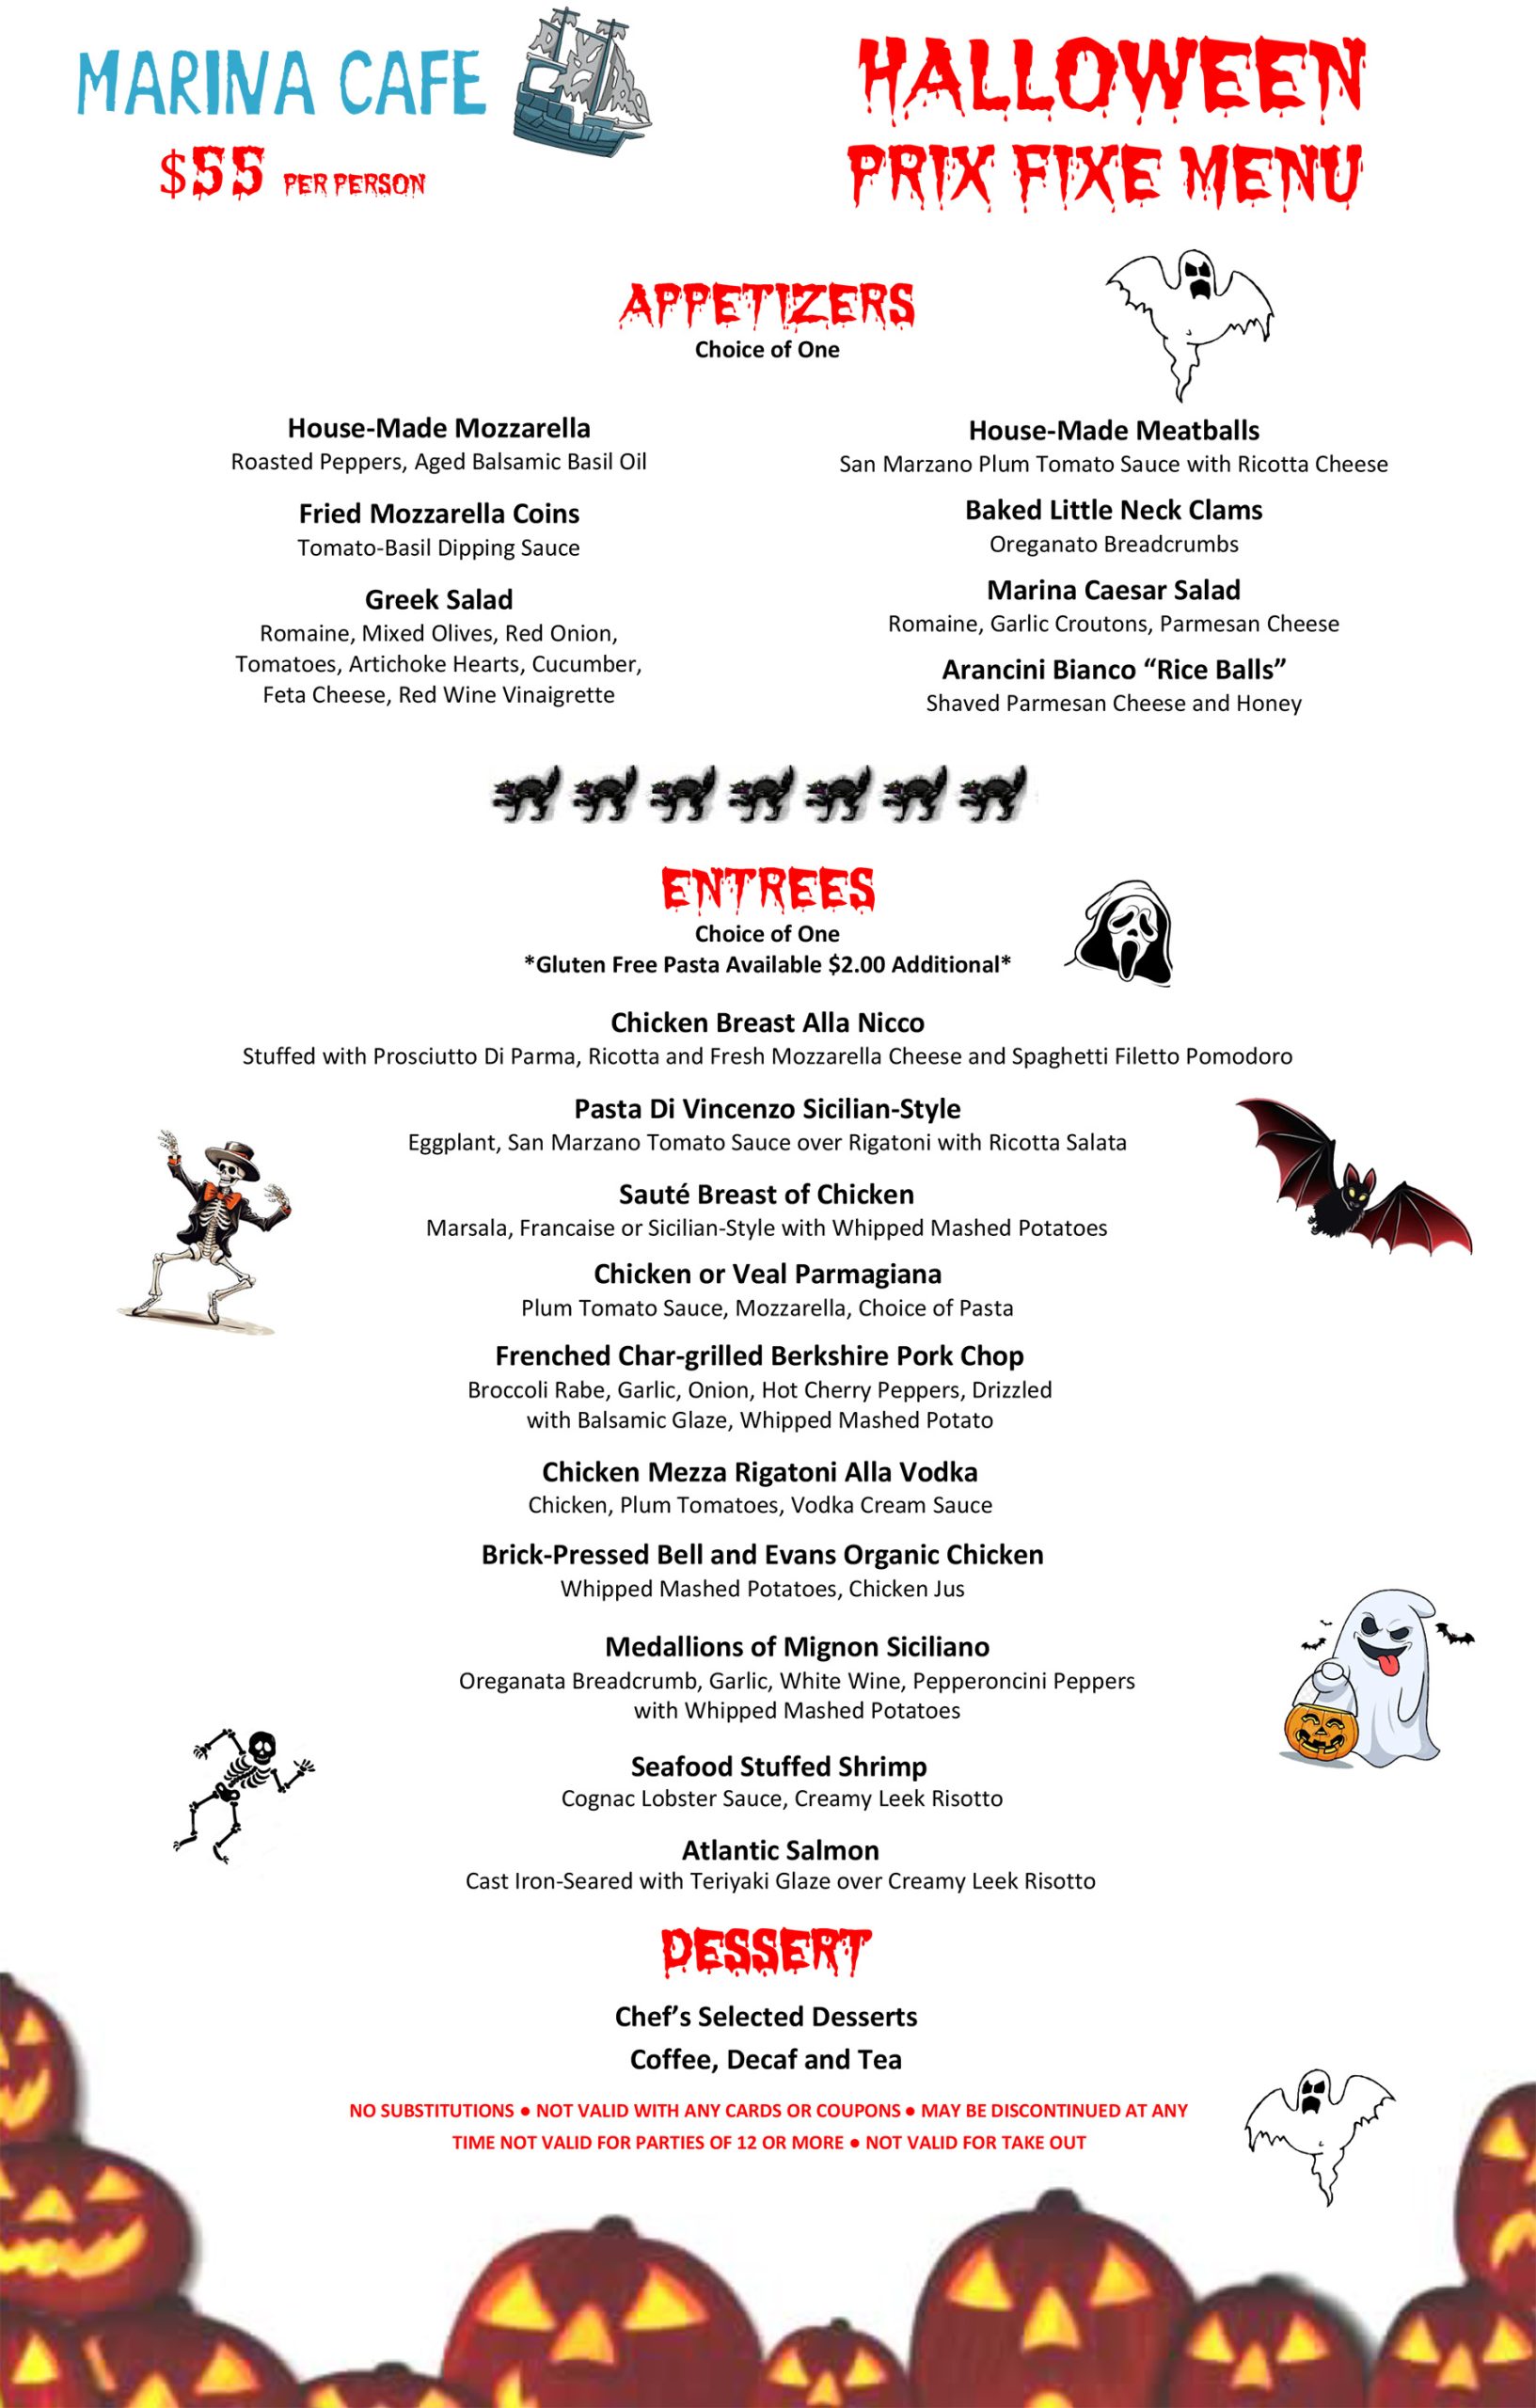 Staten Island Halloween Party Menu from Marina Cafe 2023. Call (718) 967-3077 for details.